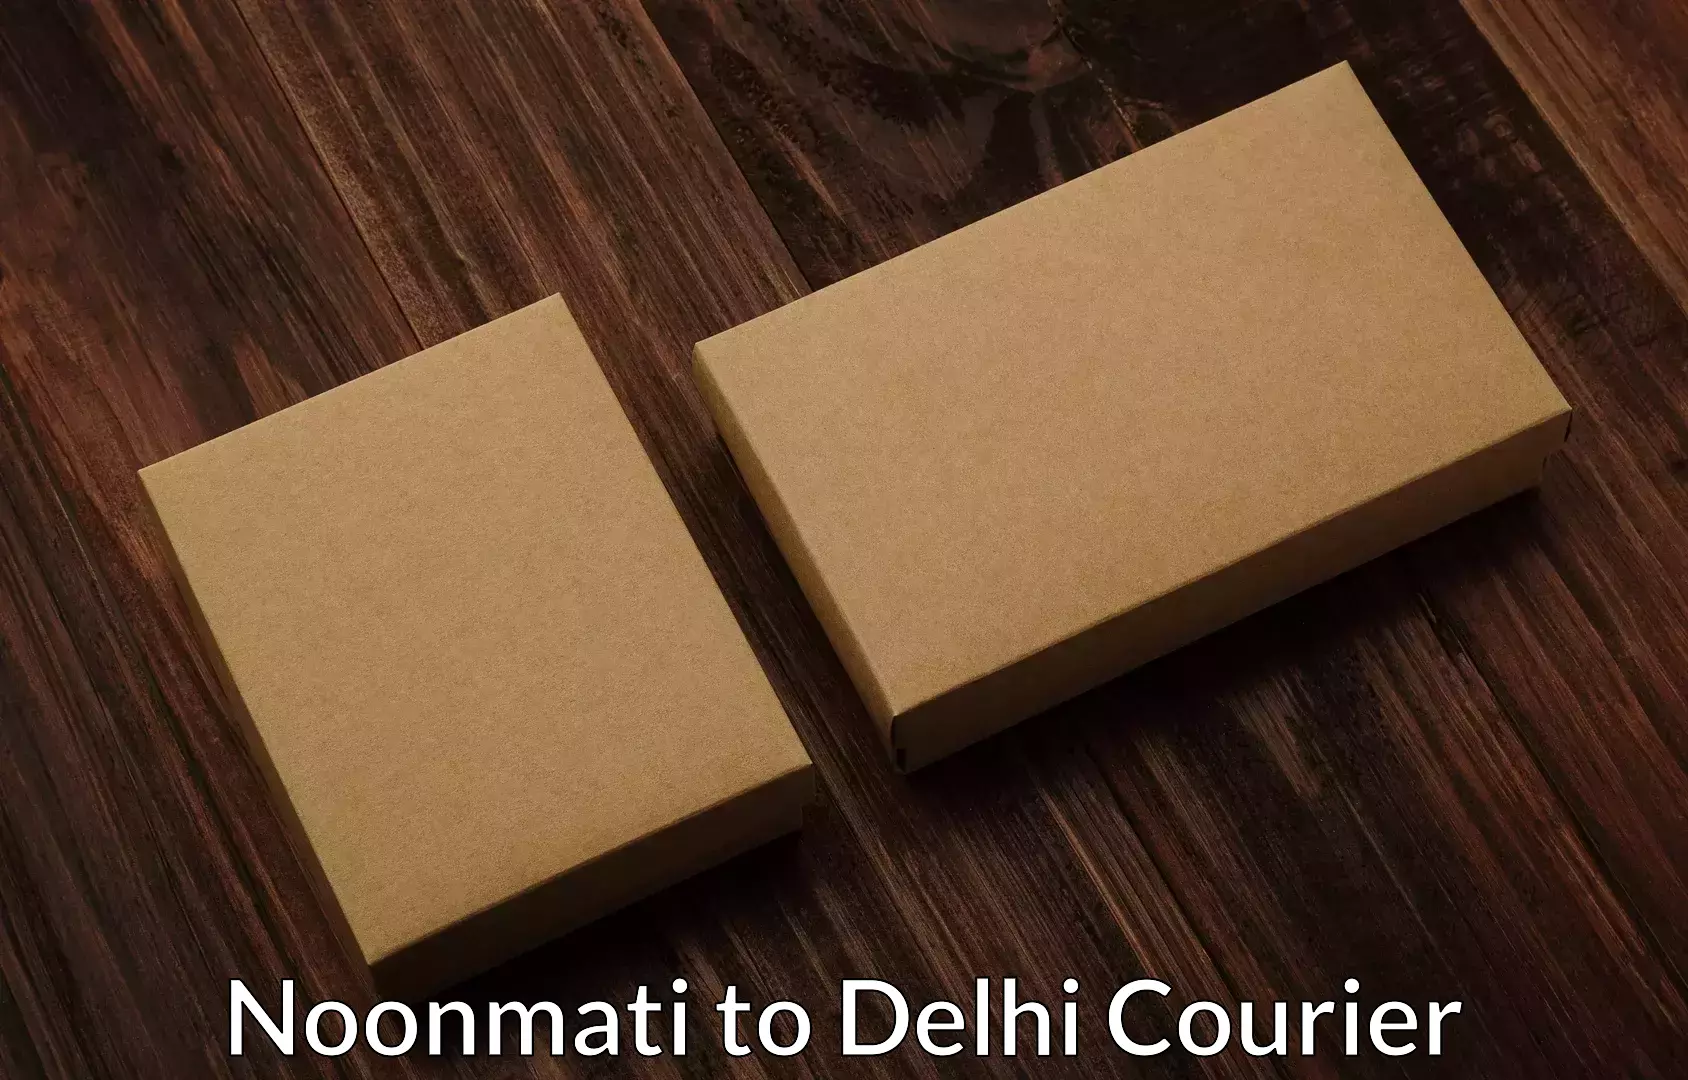 Efficient relocation services Noonmati to Lodhi Road